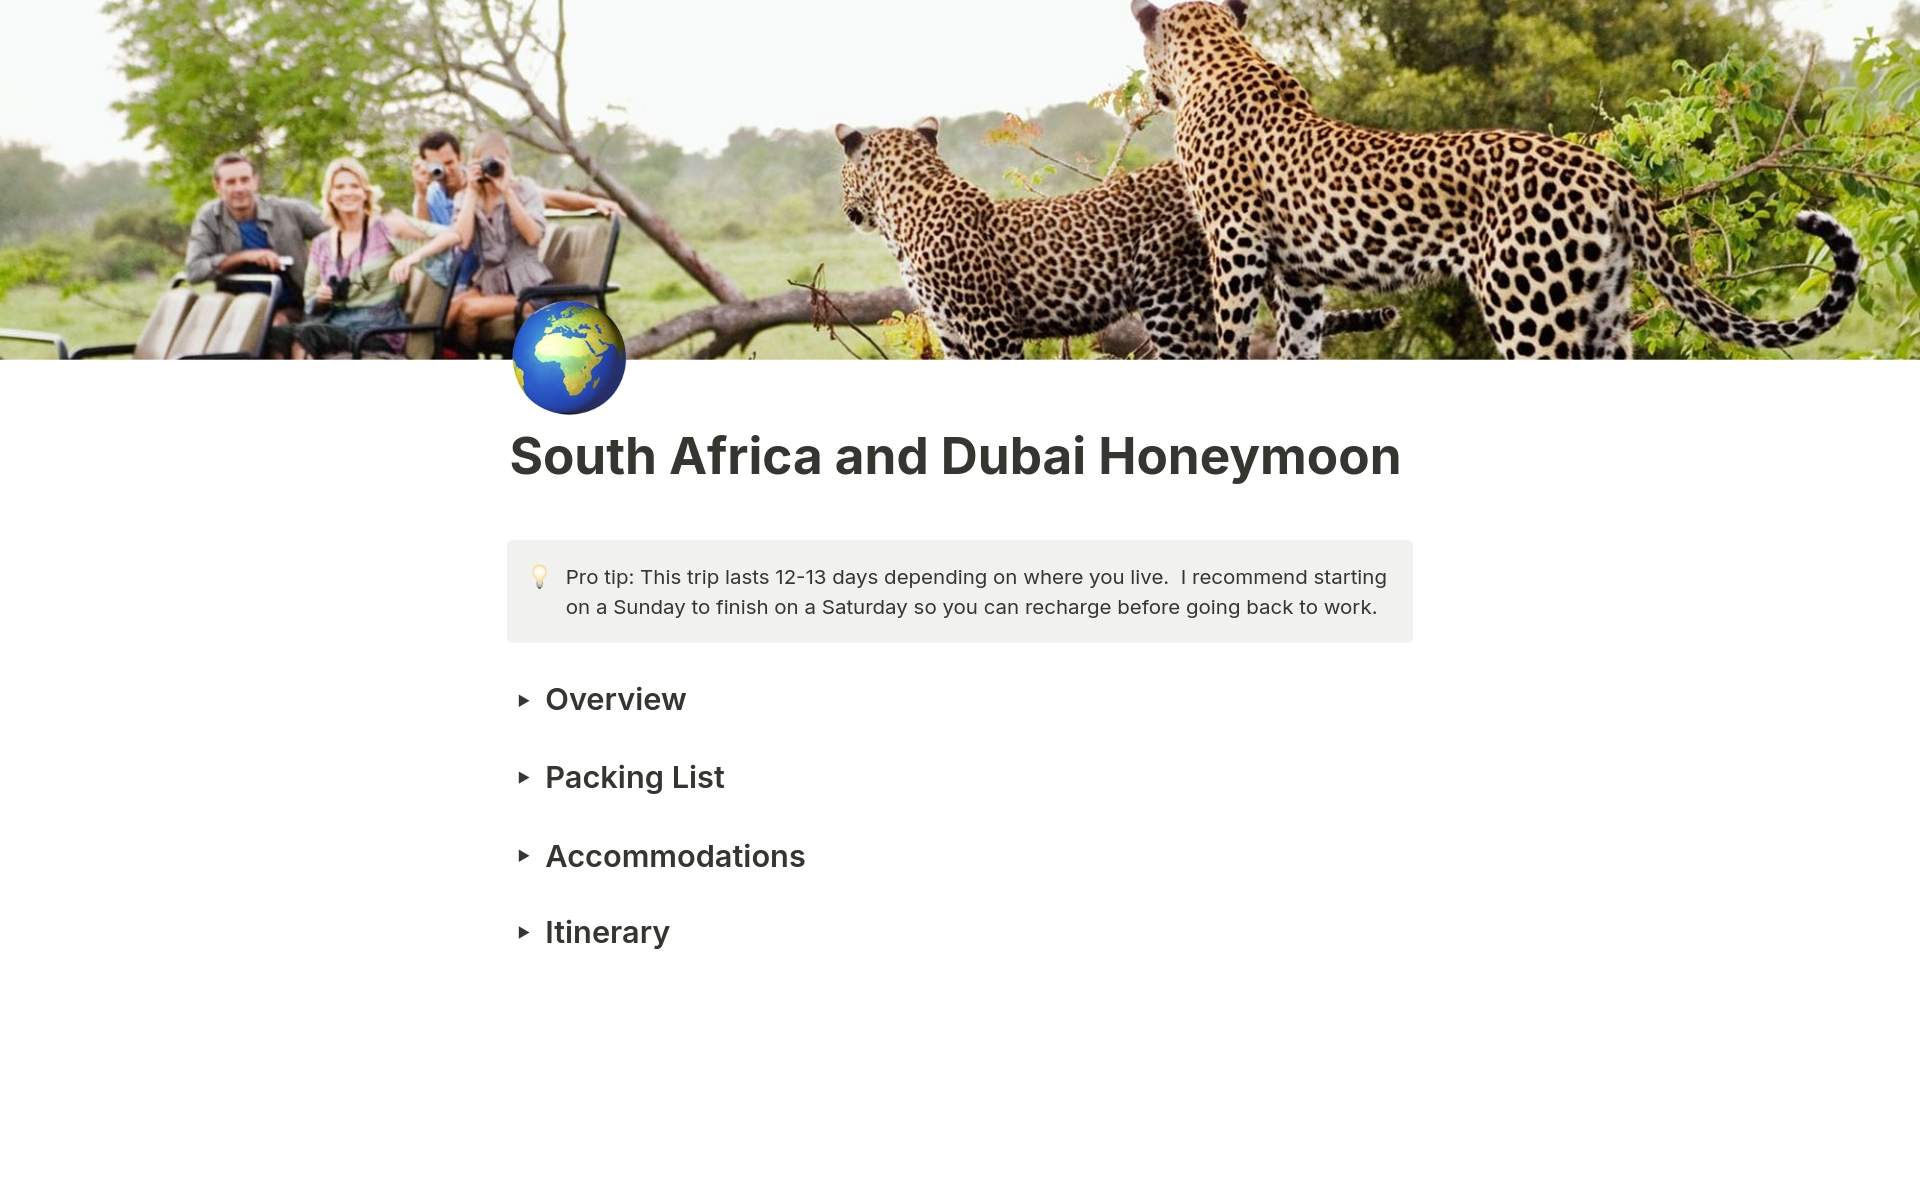 A 13 day honeymoon itinerary to Dubai and South Africa including a 4 day safari